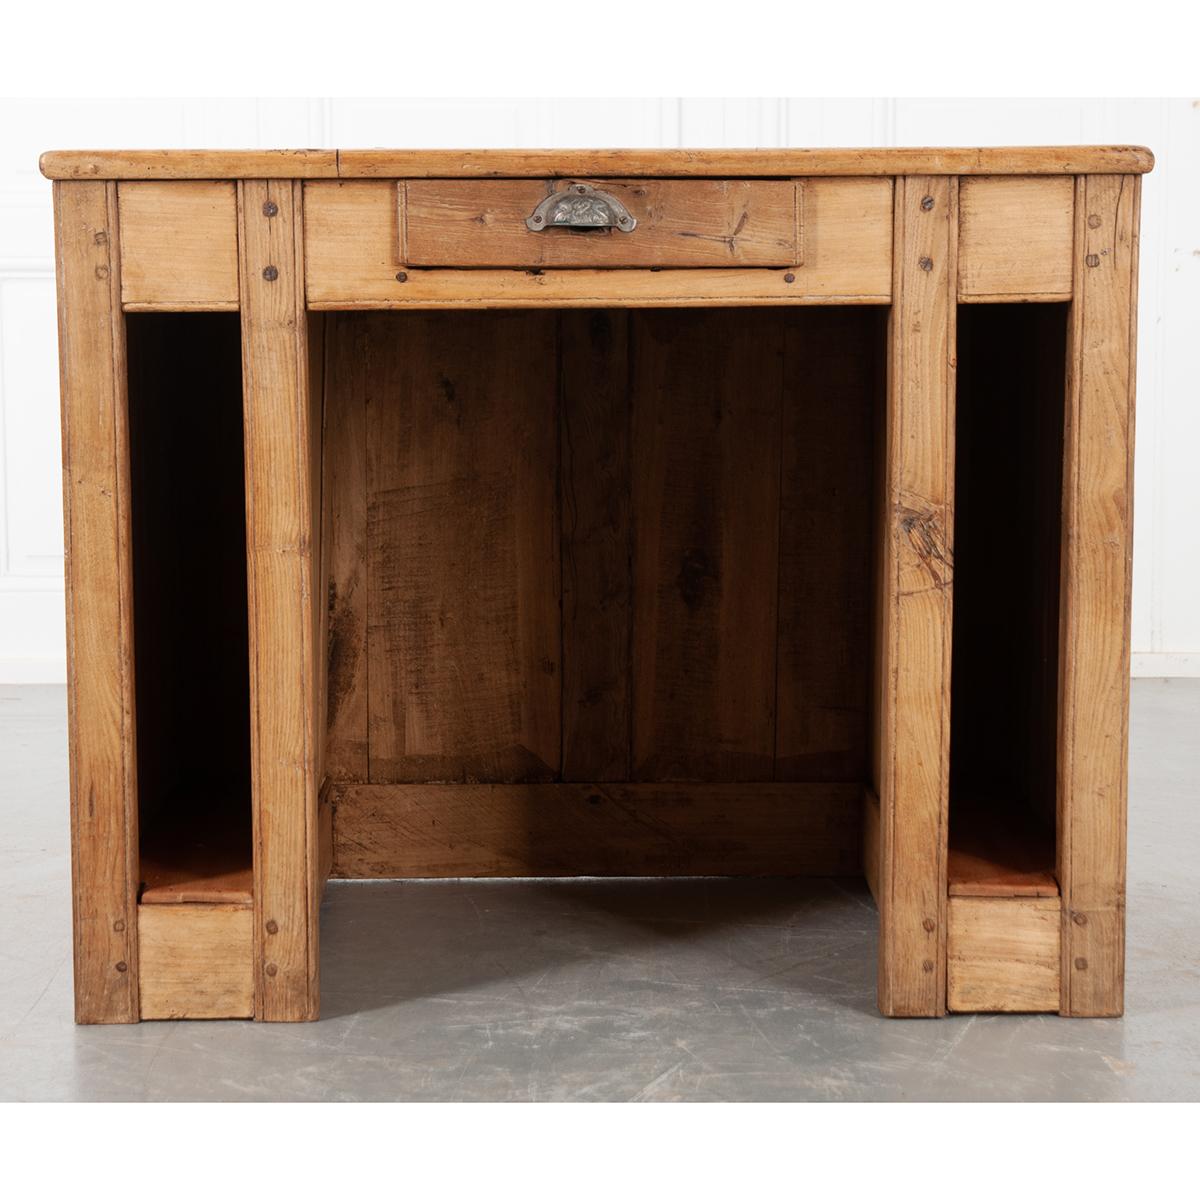 This is a simple English 19th century pine shop counter from an auctioneer in Alsace! Complete with a hole for accepting cash payments inside the drawer. The desk is flanked with tall open storage spaces which would have held ledger books. A very